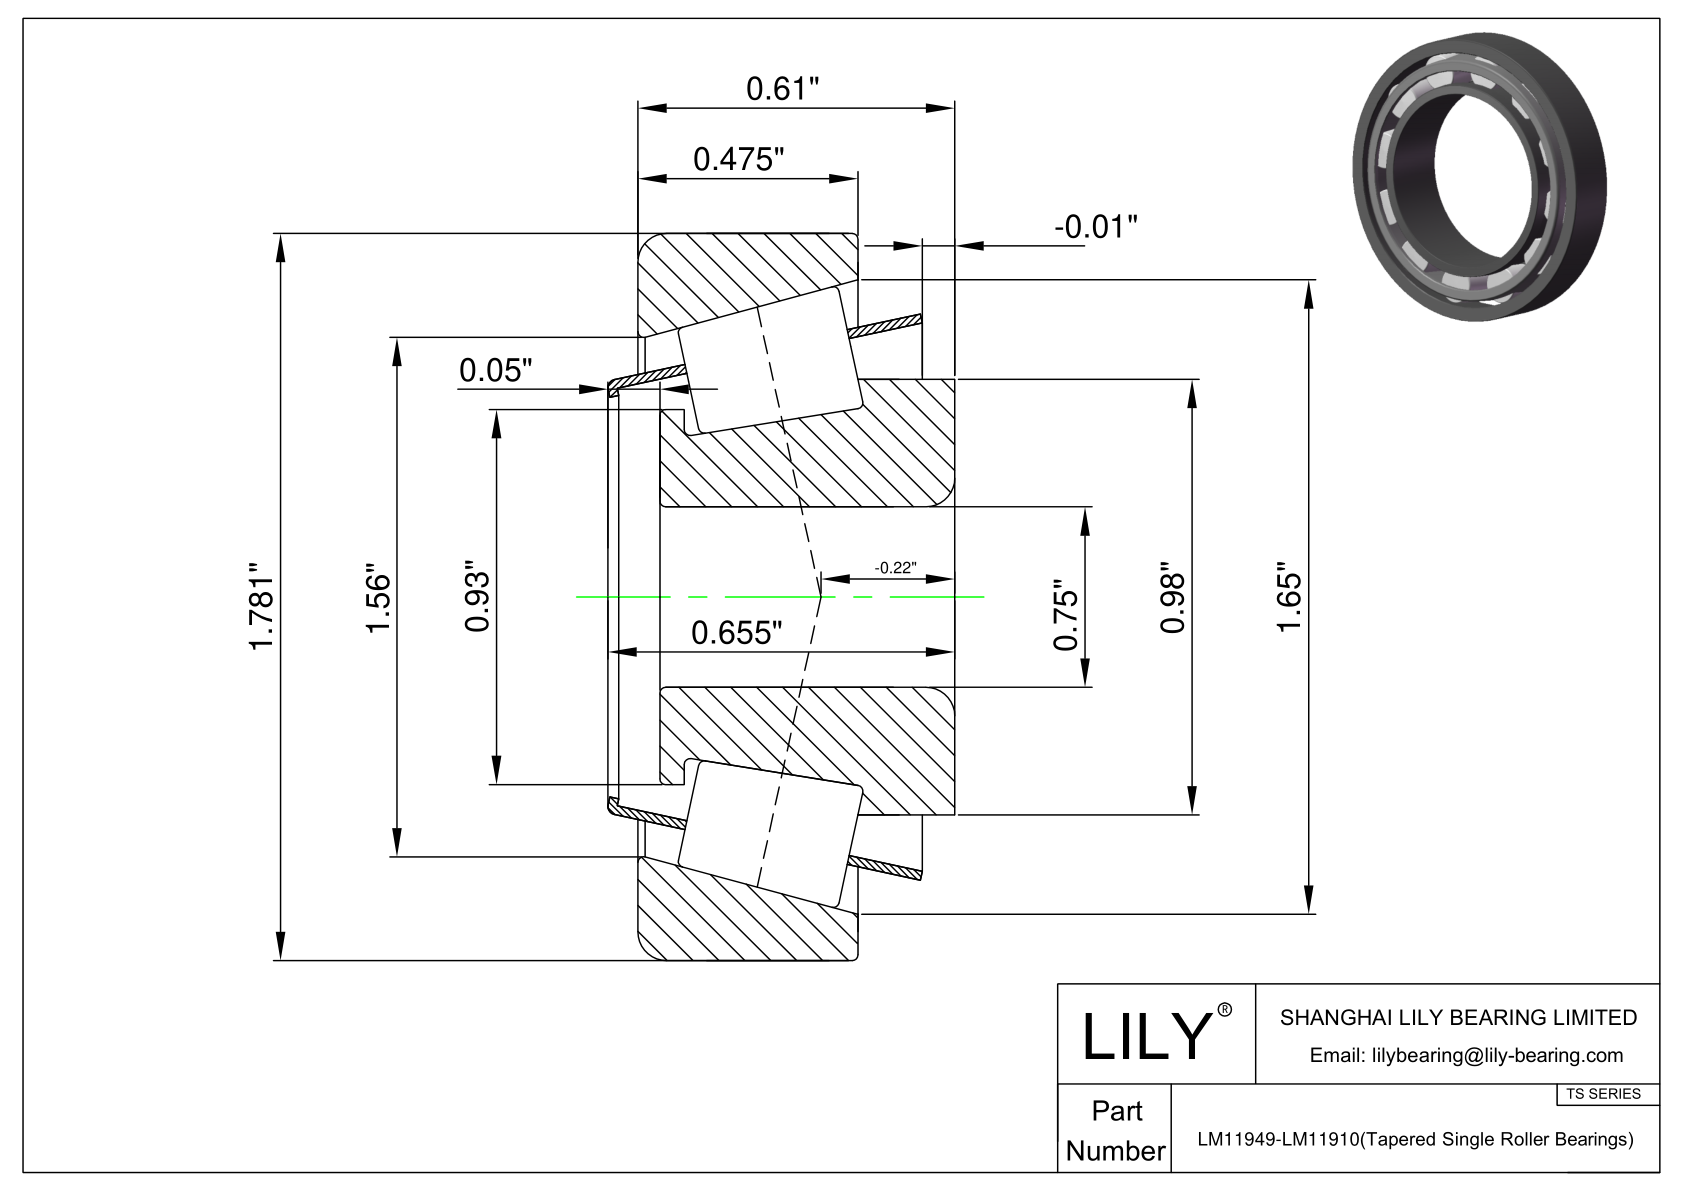 LM11949-LM11910 TS (Tapered Single Roller Bearings) (Imperial) cad drawing